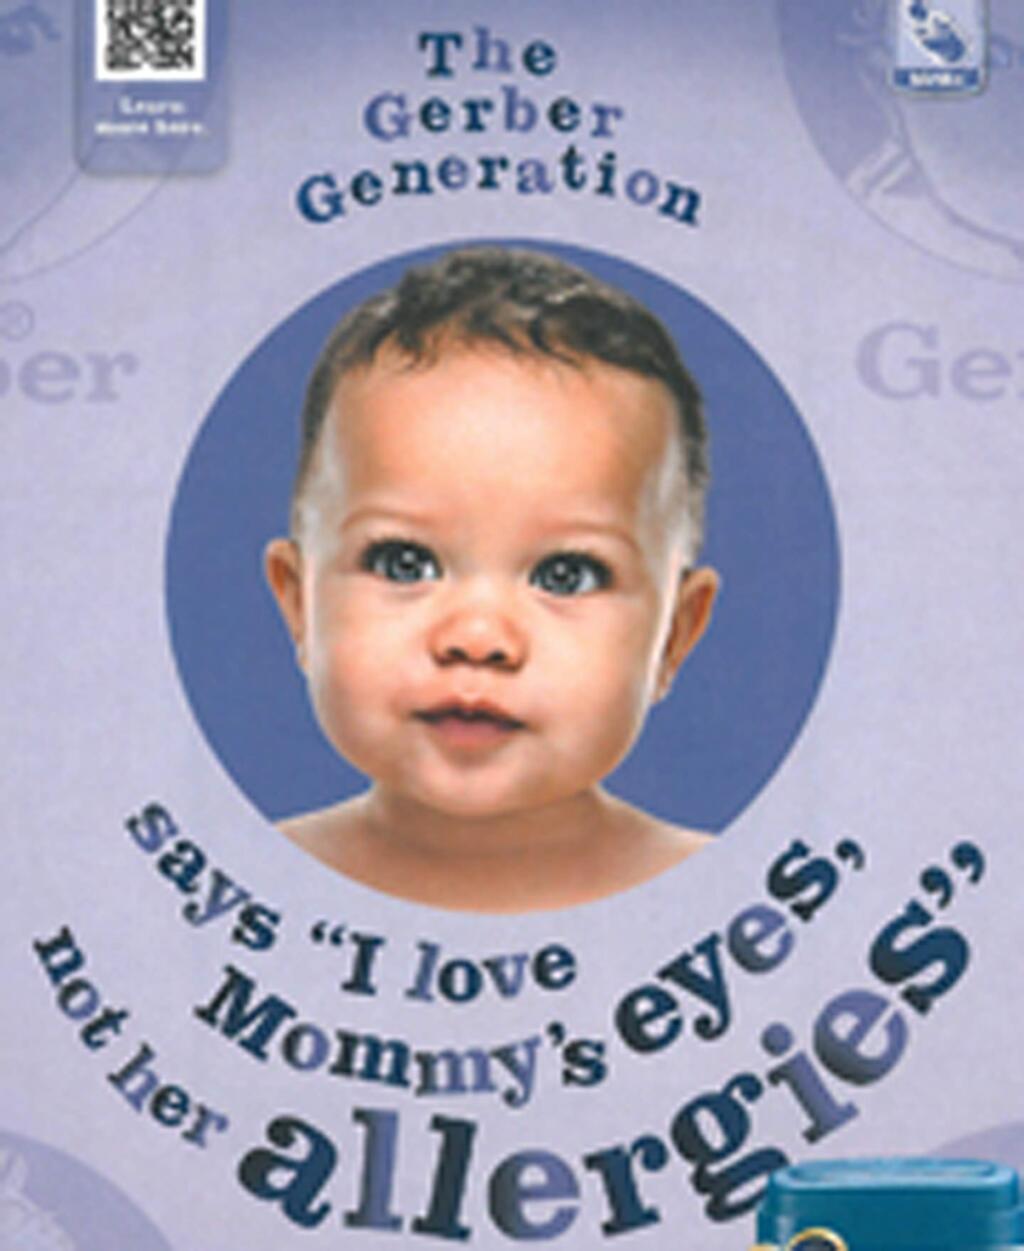 This handout image provided by the Federal Trade Commission (FTC) shows a label from Gerber Good Start Gentle formula. Federal regulators announced Thursday they were suing Gerber, the well-known baby food maker, for claiming that its Good Start Gentle formula can prevent or reduce allergies in children. (AP Photo/FTC)